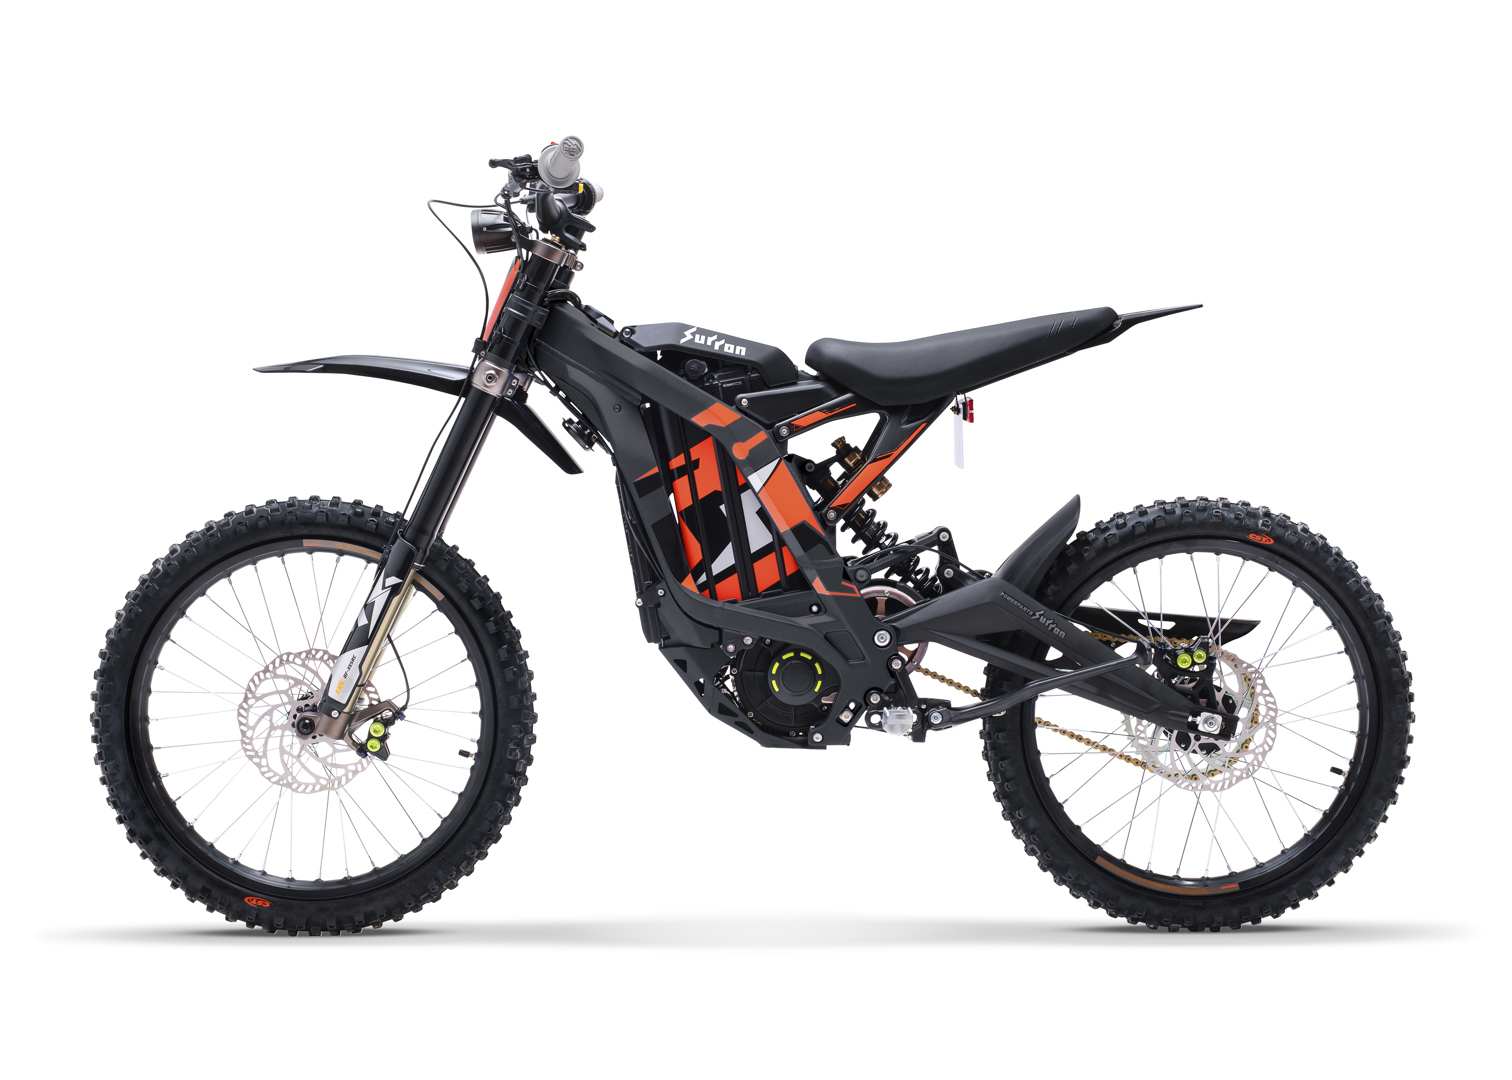 2024 SURRON Light Bee X in stock and ready to ride!